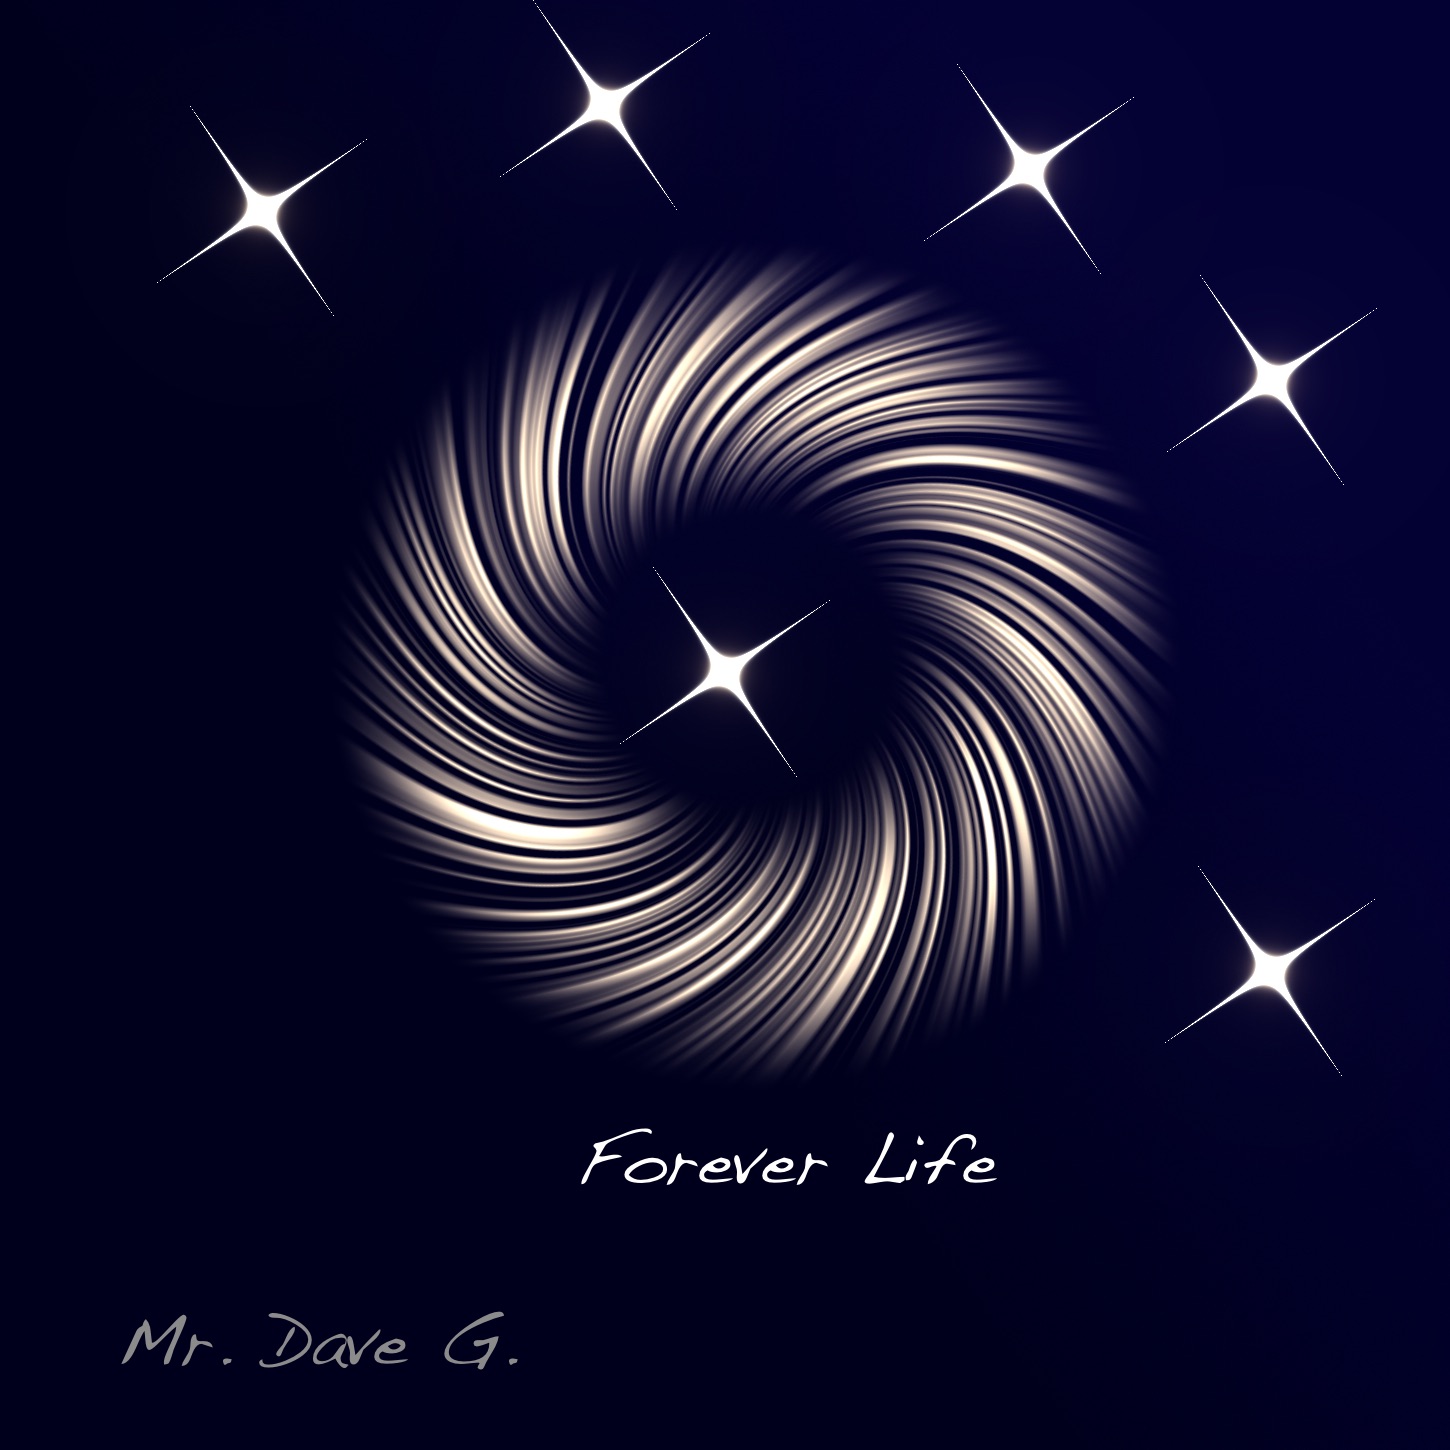 Life is forever. Life Forever. Dave g. rearo.